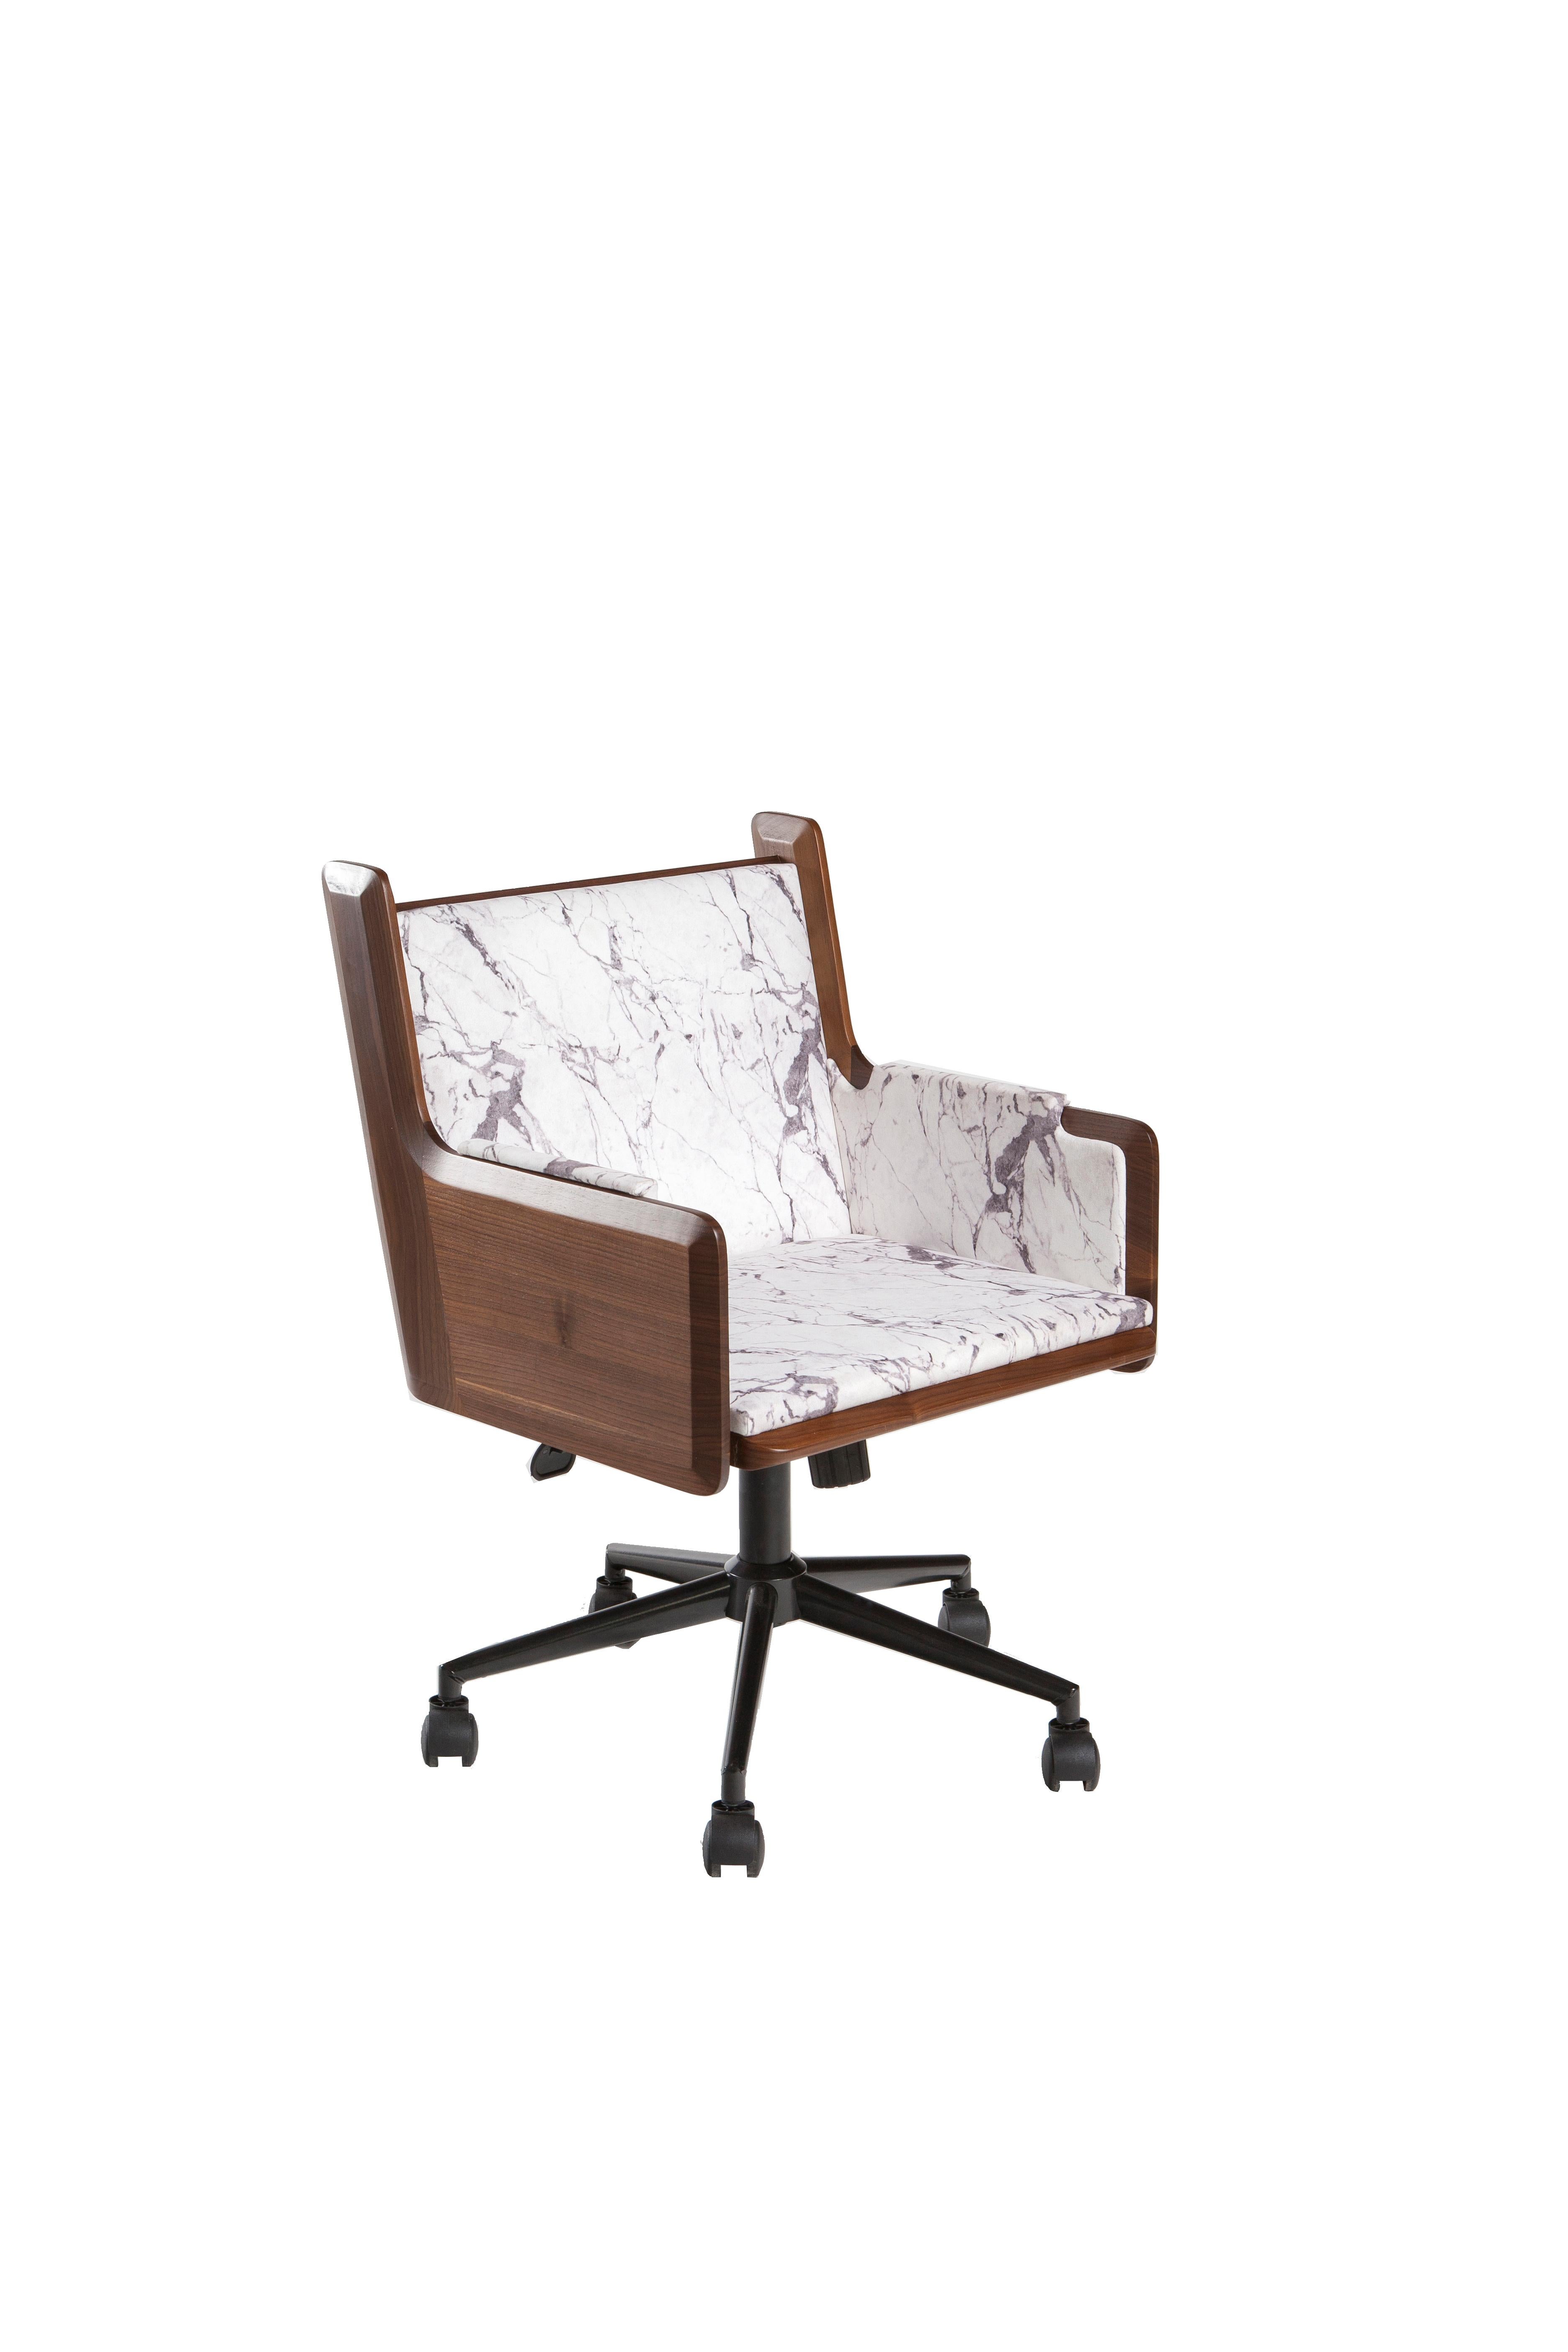 Kontra’s interpretation of the lounge chair with a solid walnut or oak body and leather upholstery.
